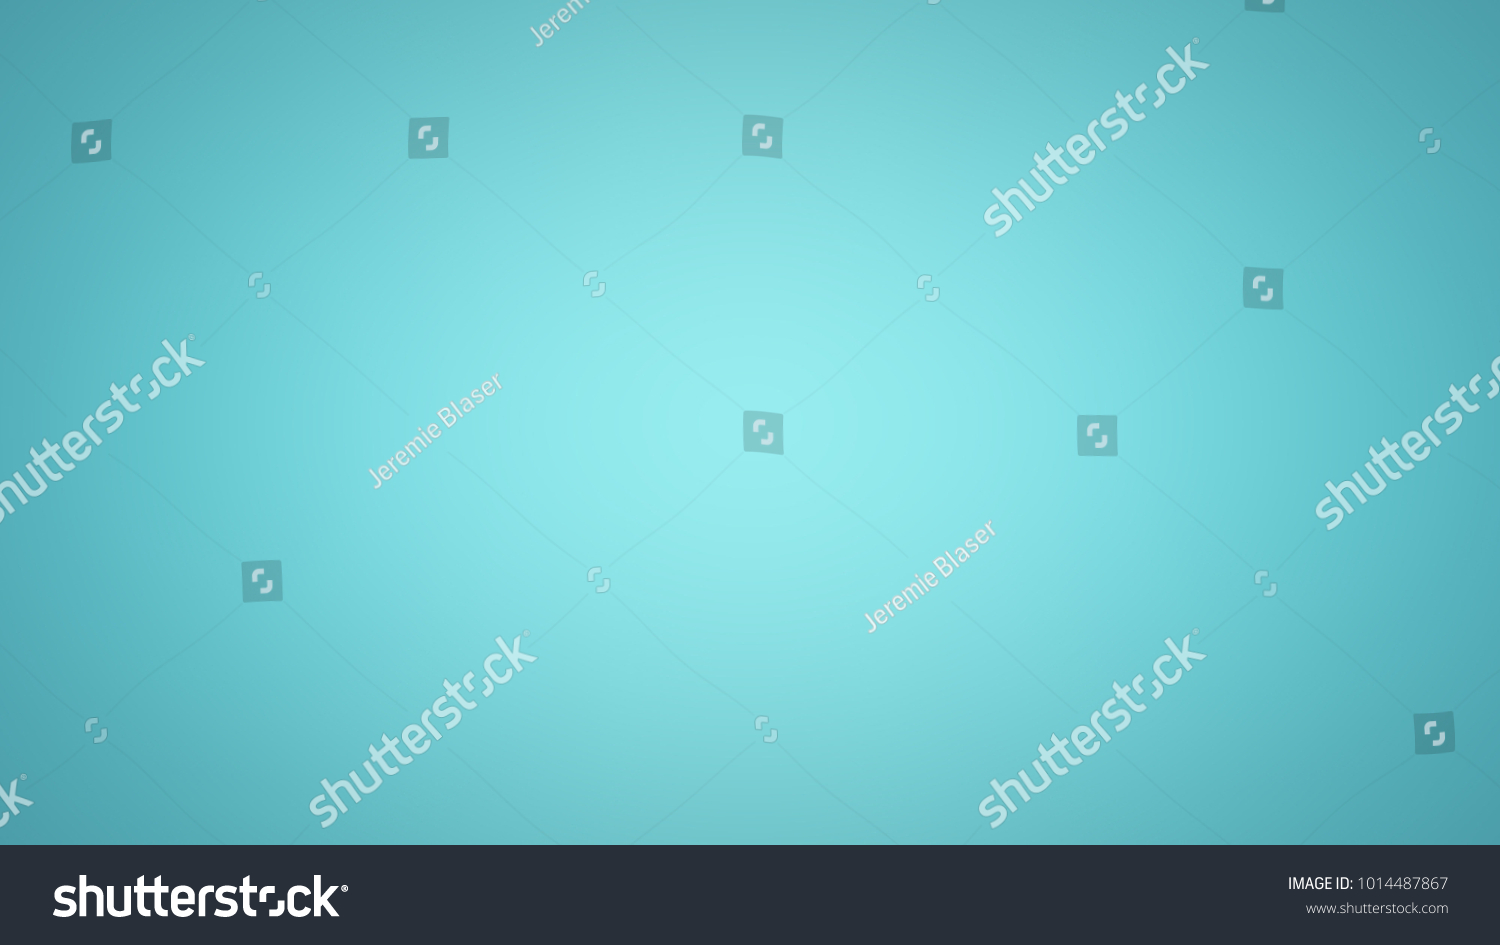 High quality gradient background #1014487867